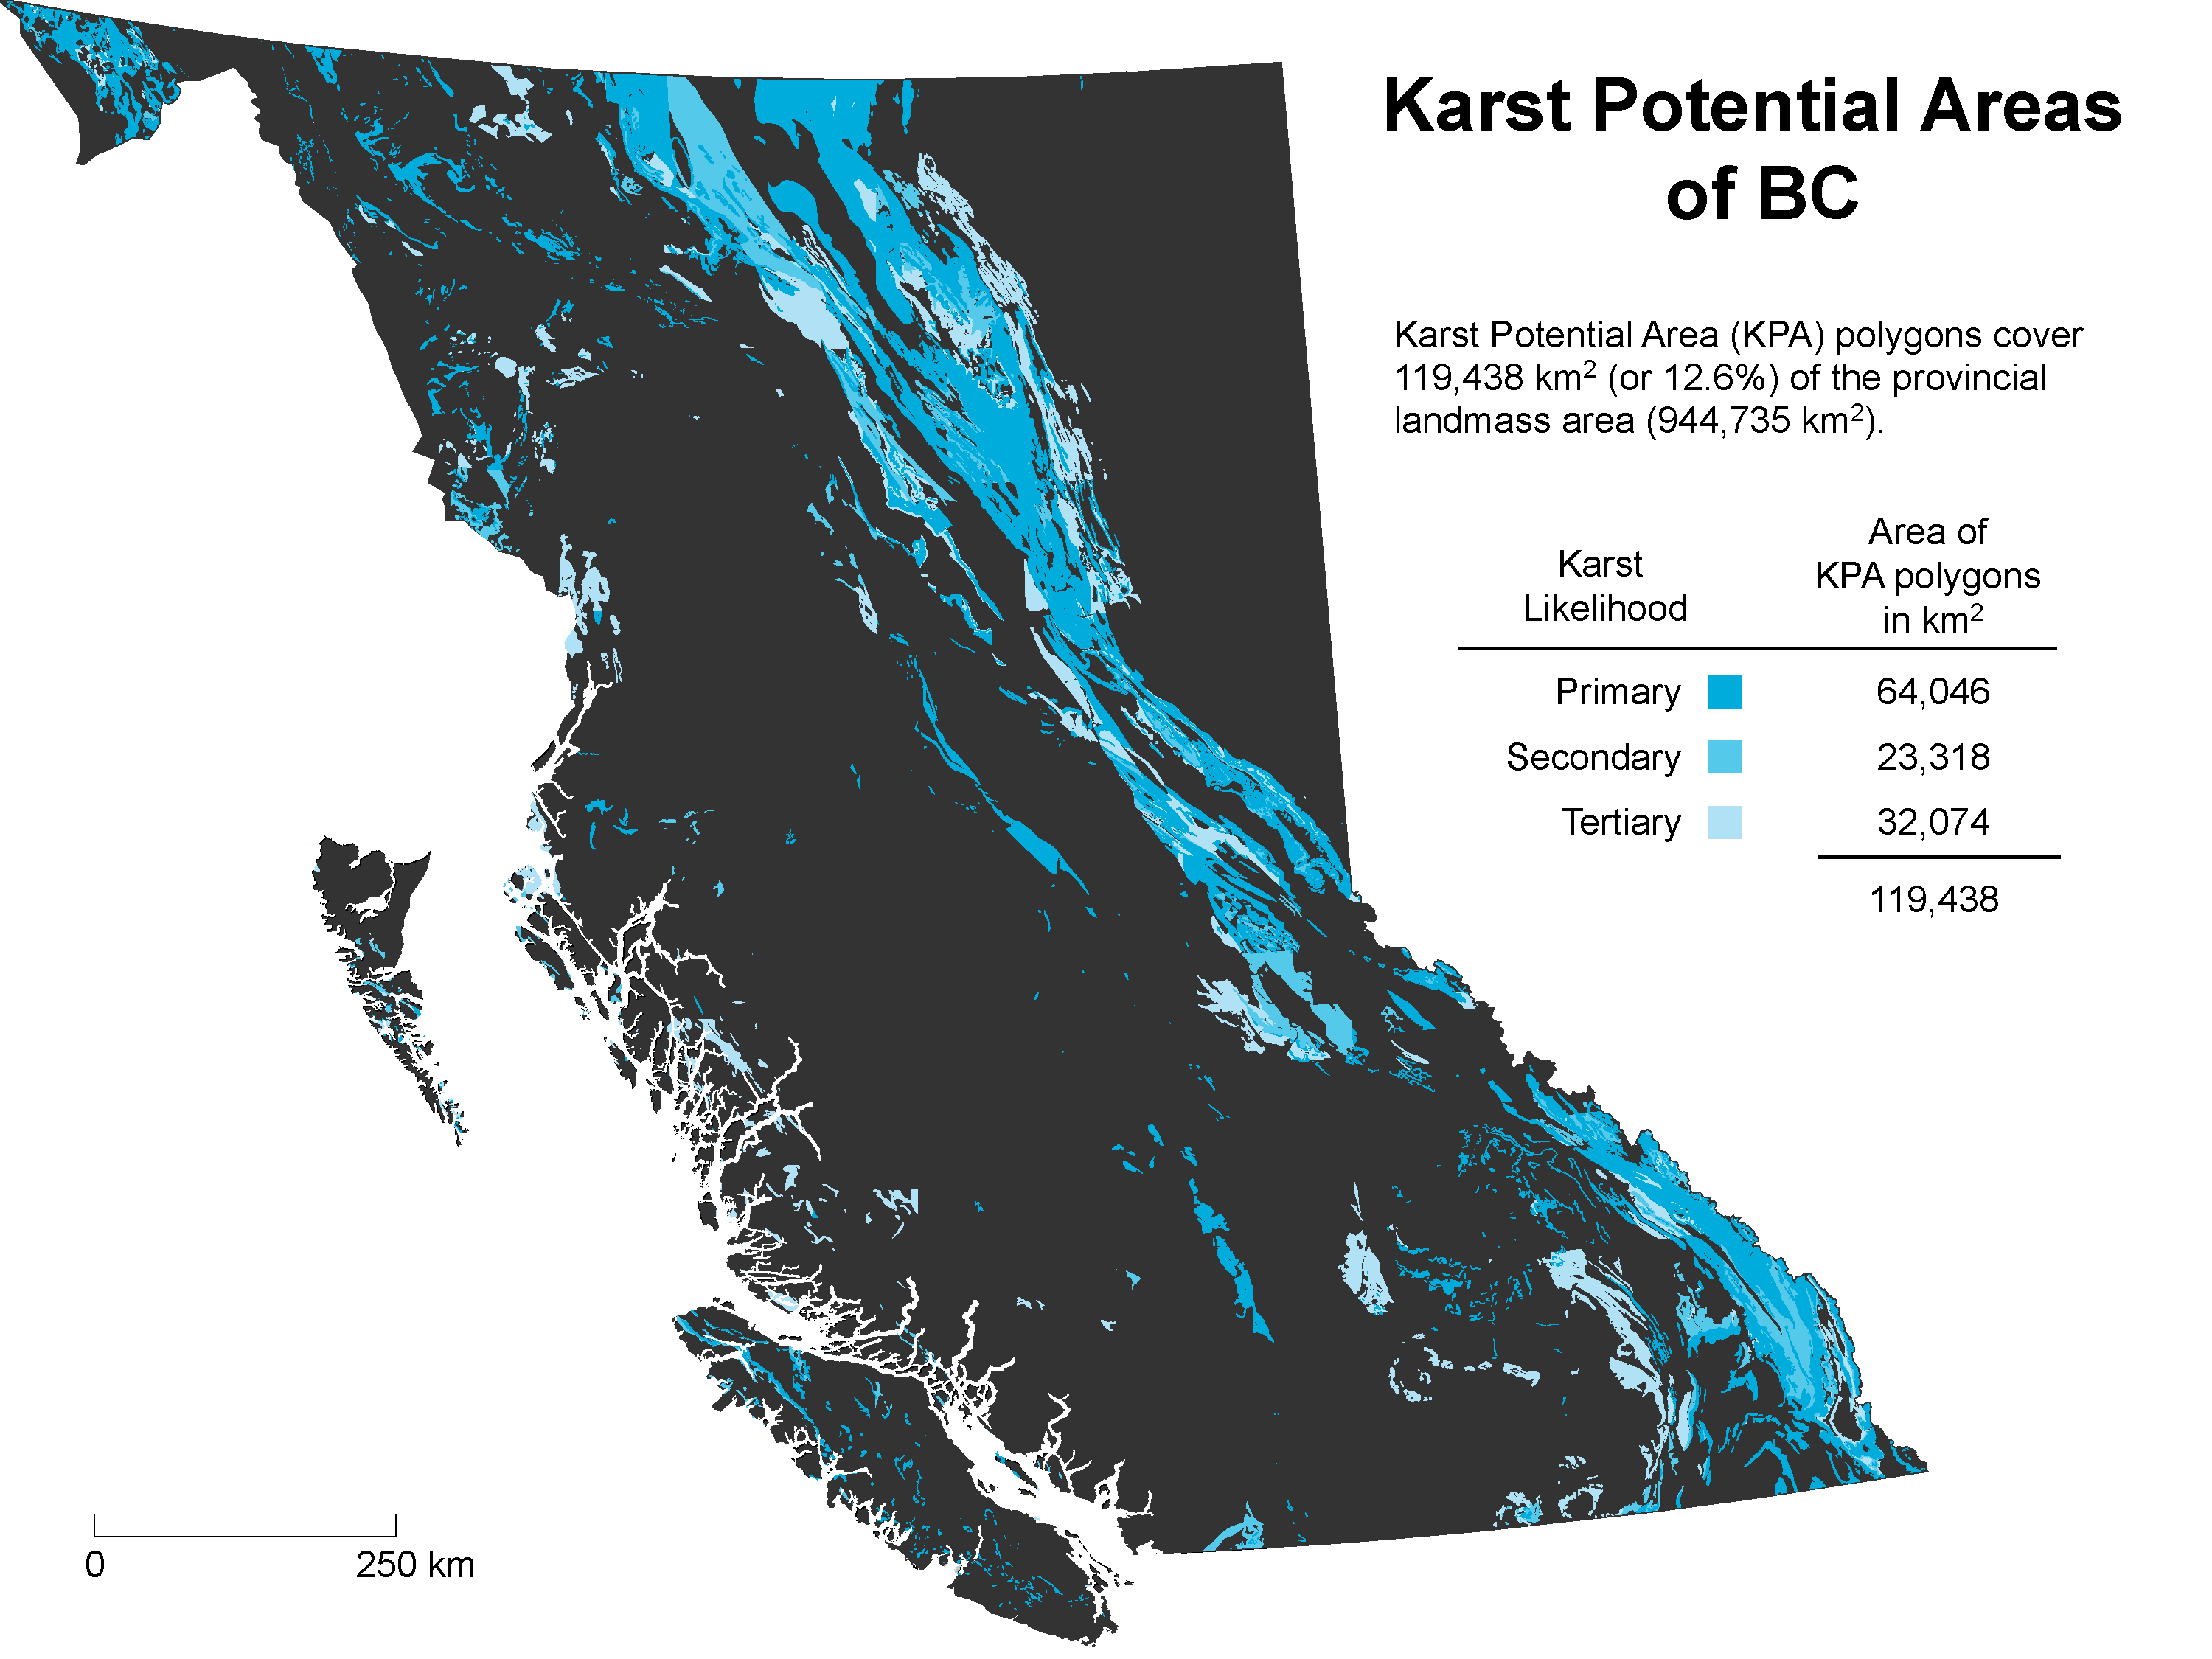 Karst Potential Areas of BC